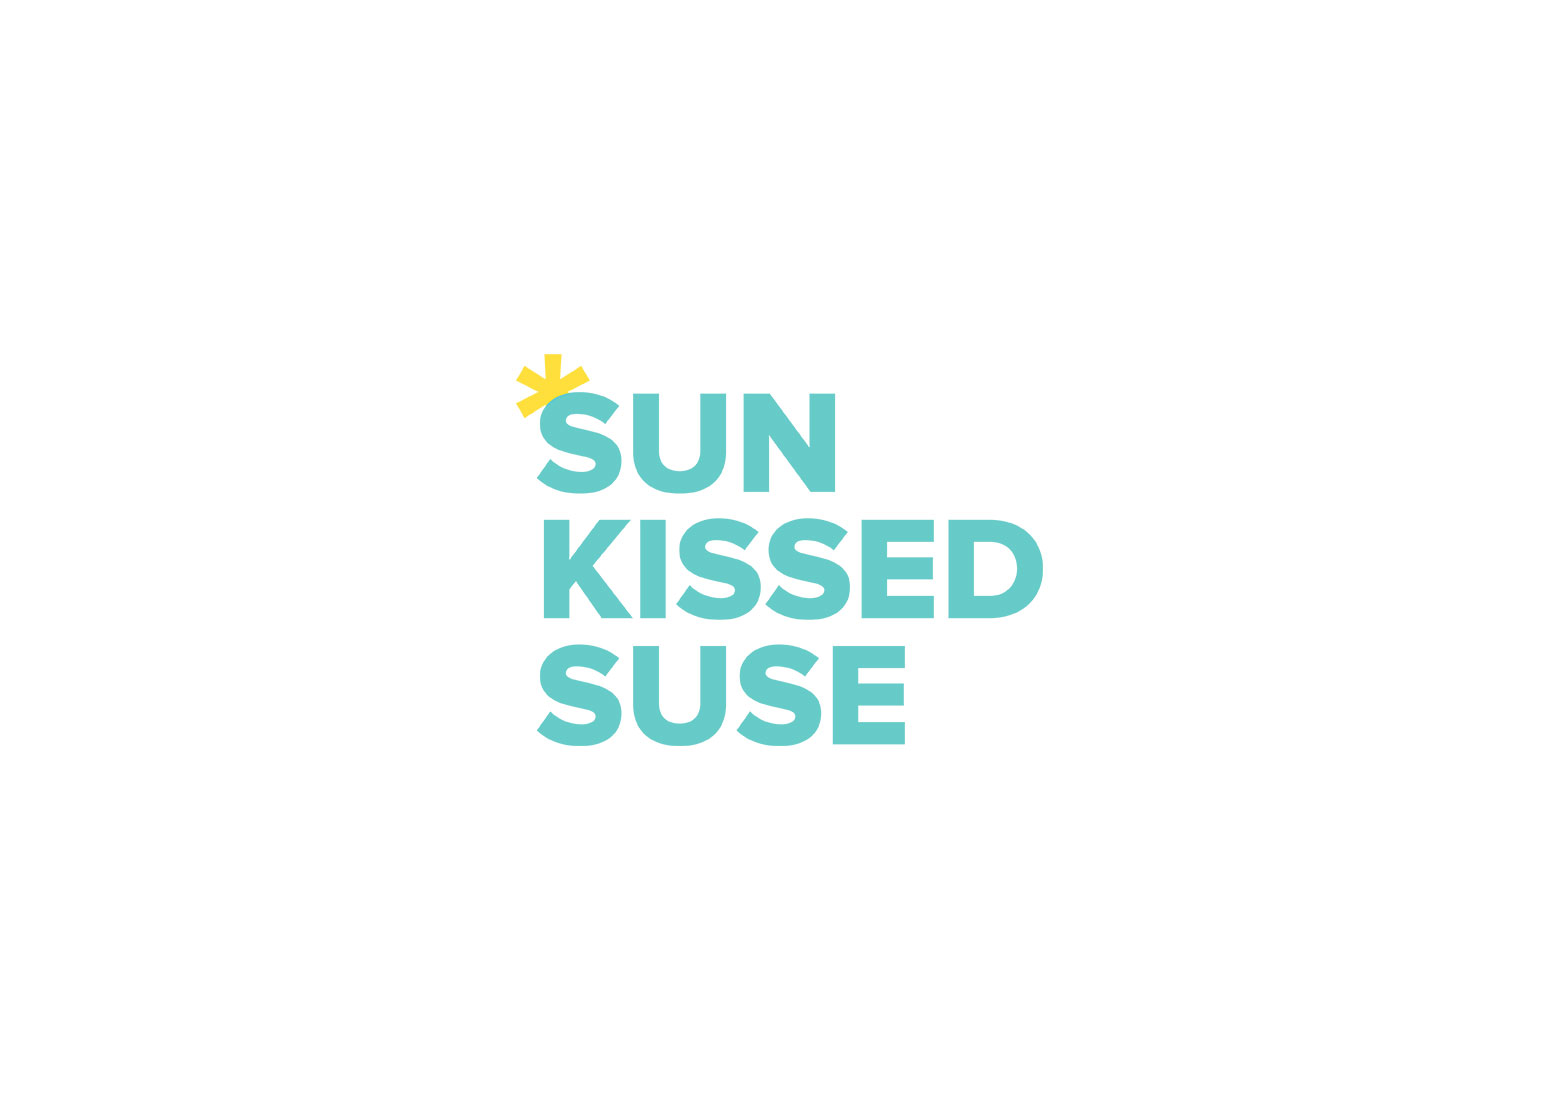 Sunkissed Suse by Rising Creative